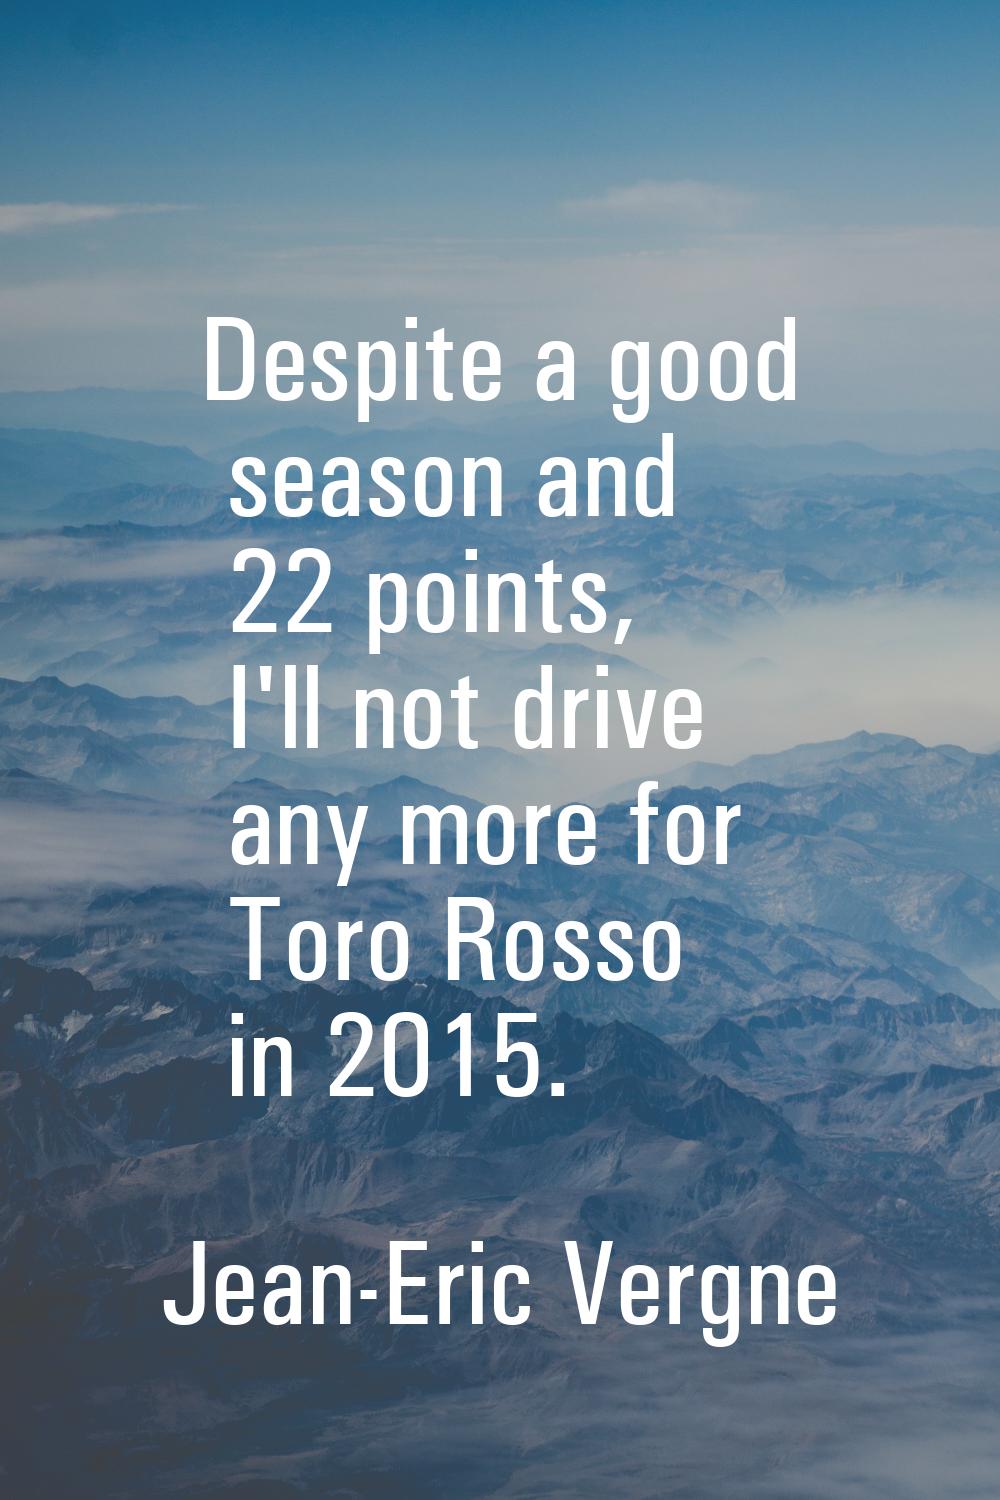 Despite a good season and 22 points, I'll not drive any more for Toro Rosso in 2015.